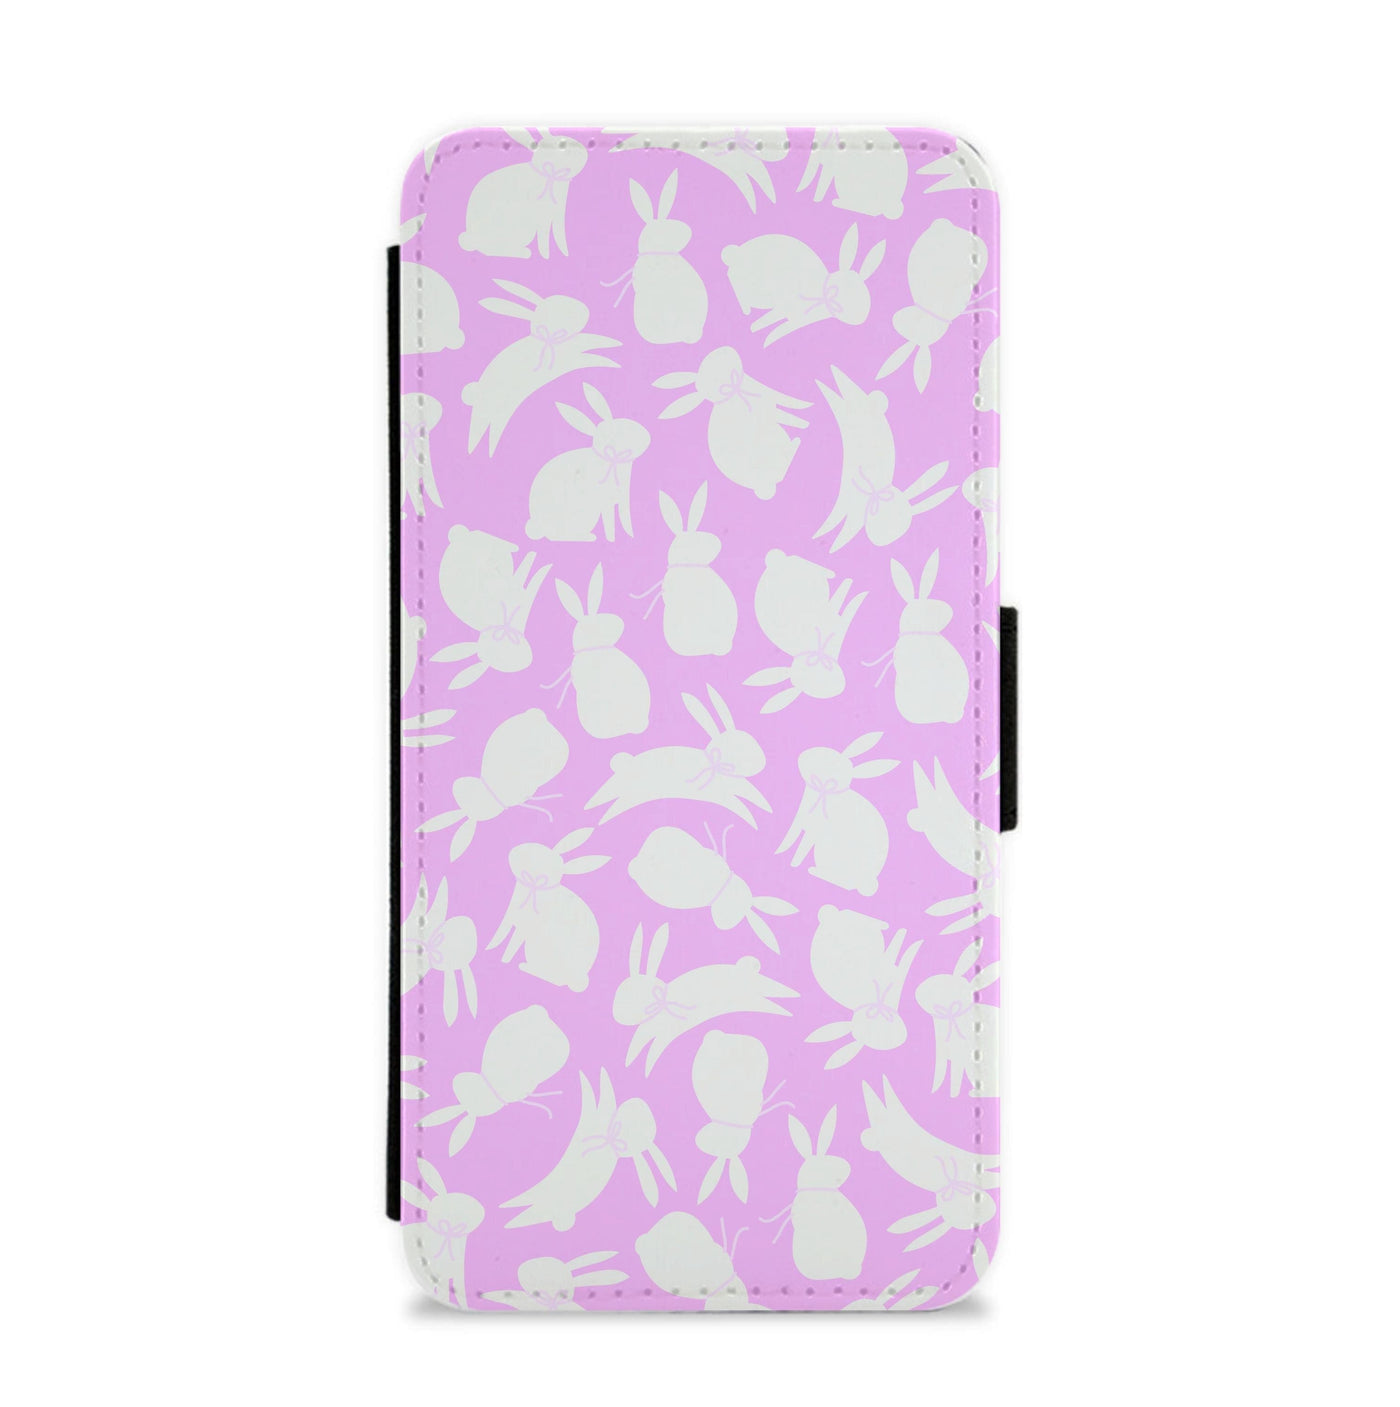 Bunnies And Bows - Easter Patterns Flip / Wallet Phone Case